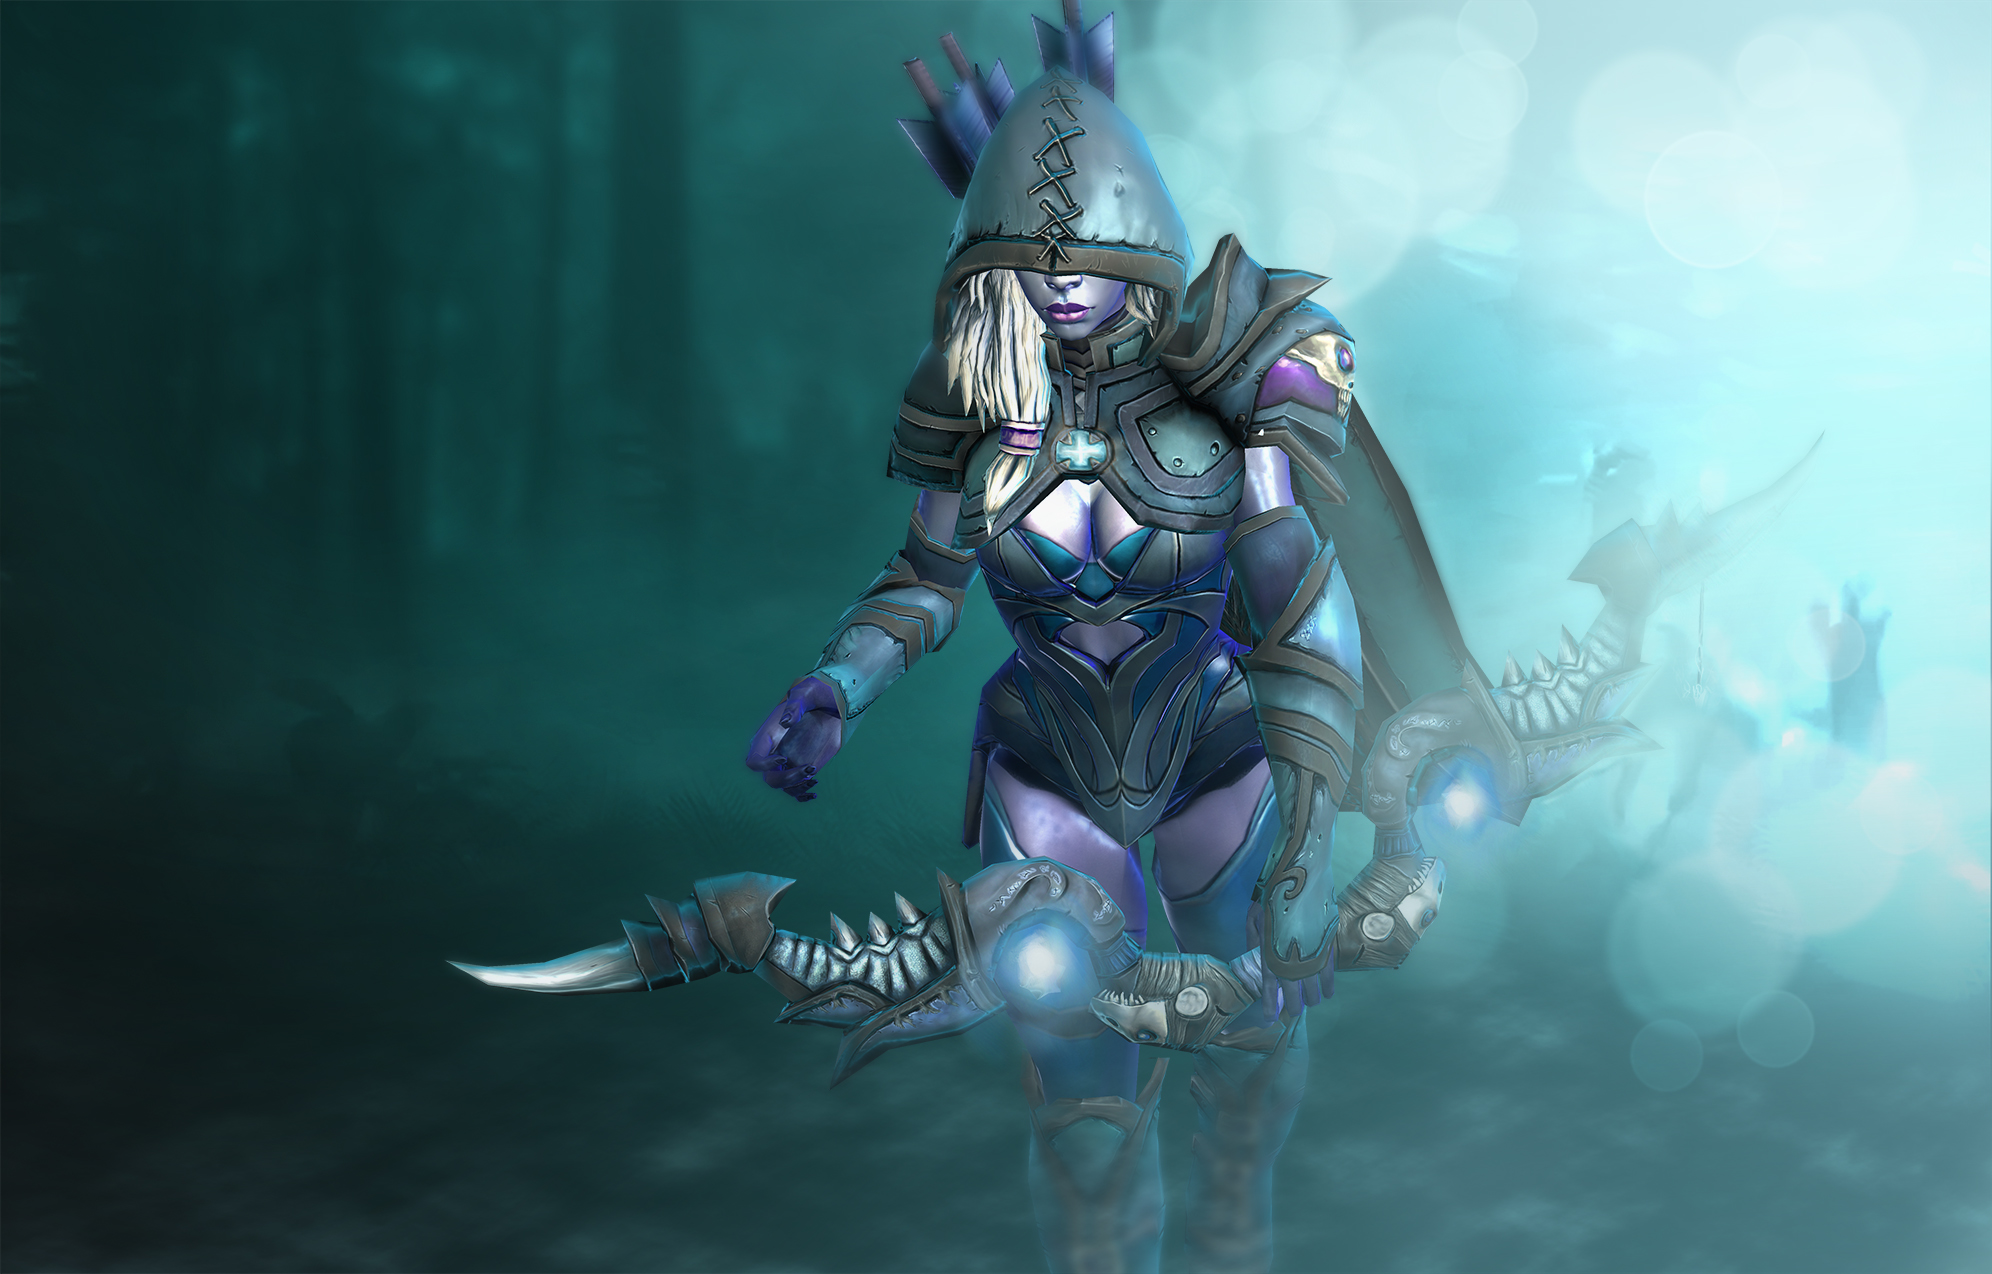 Drow Ranger Image HD Wallpaper And Background